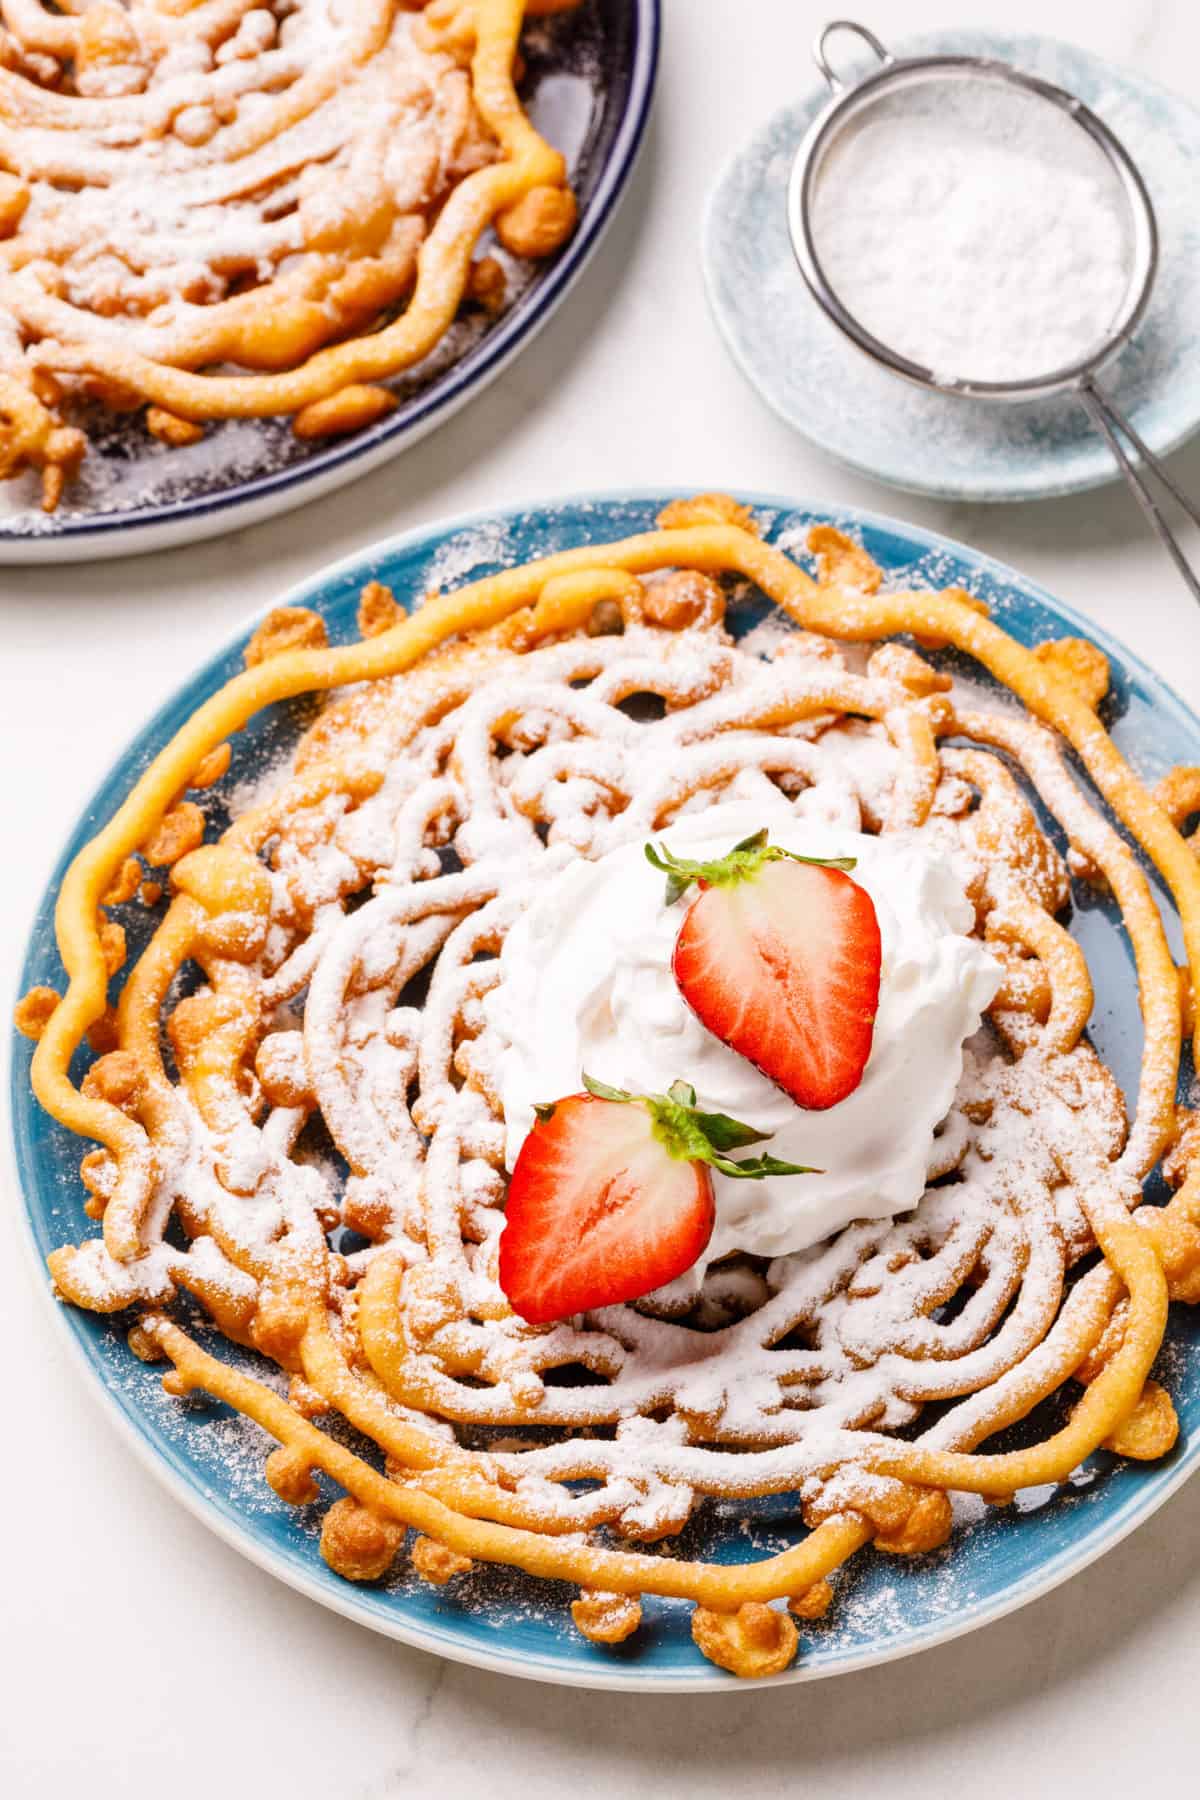 homemade pancake mix funnel cake topped with powdered sugar, whipped cream, and fresh halved strawberries served on a blue round plate